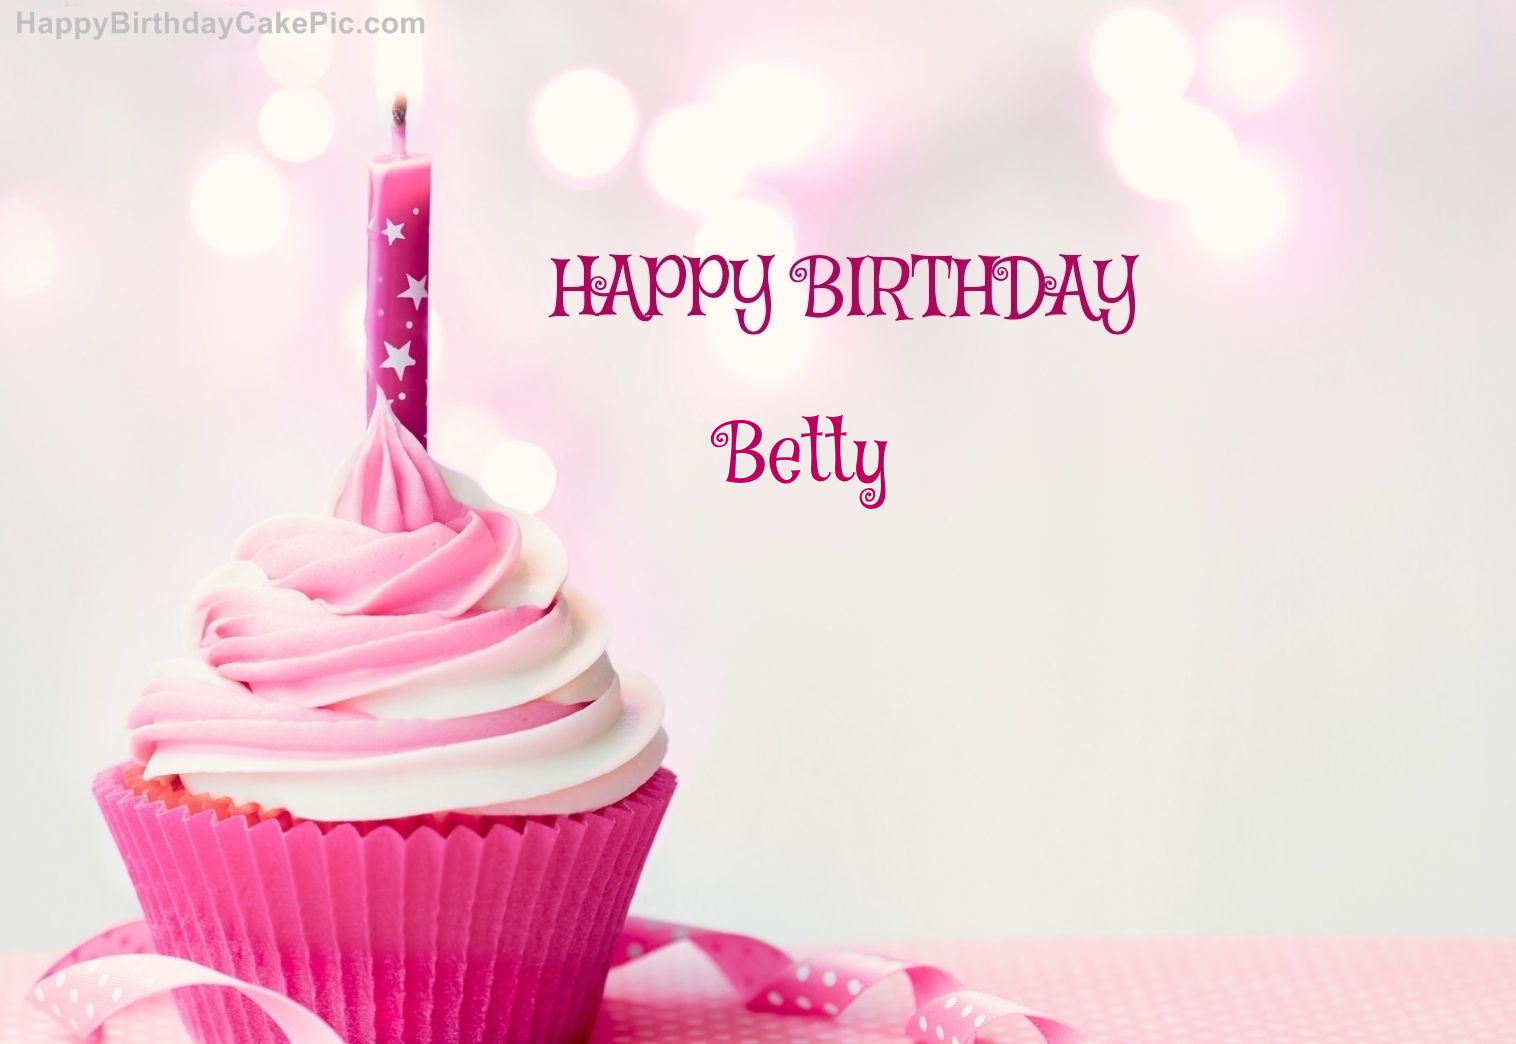 http://happybirthdaycakepic.com/pic-preview/Betty/7/0/happy-birthday-cupcake-candle-pink-picture-for-Betty.jpg